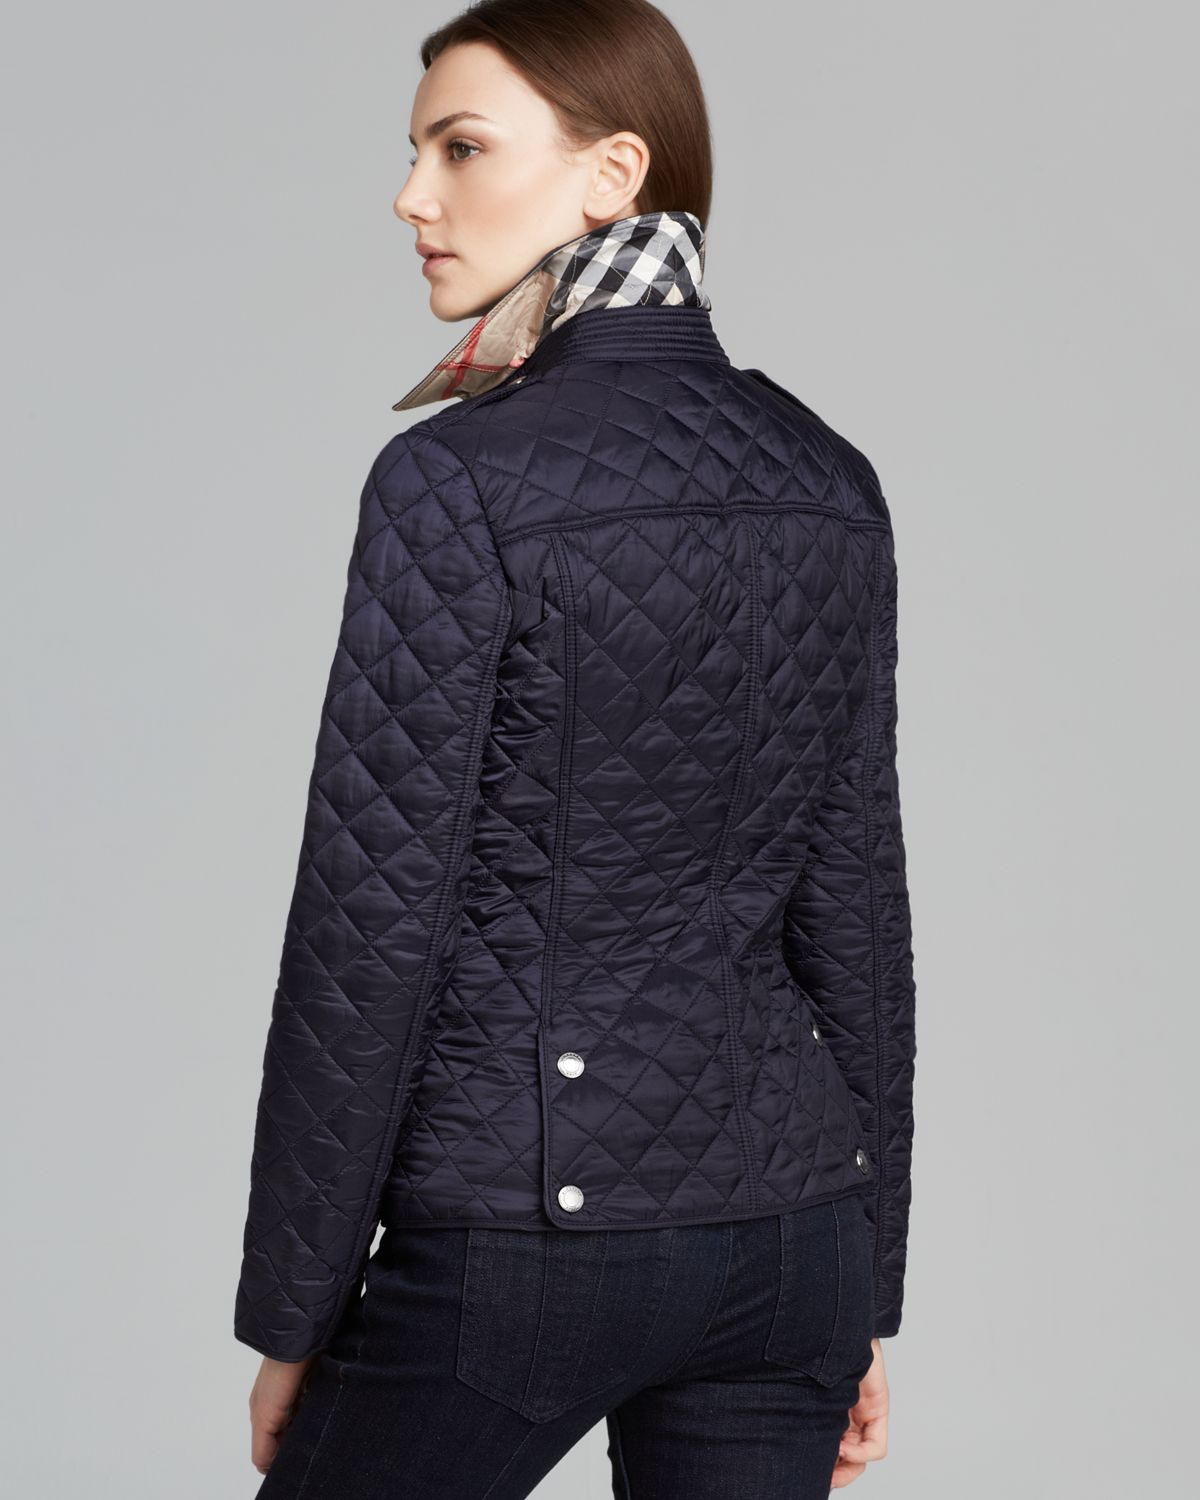 burberry kencott quilted jacket review